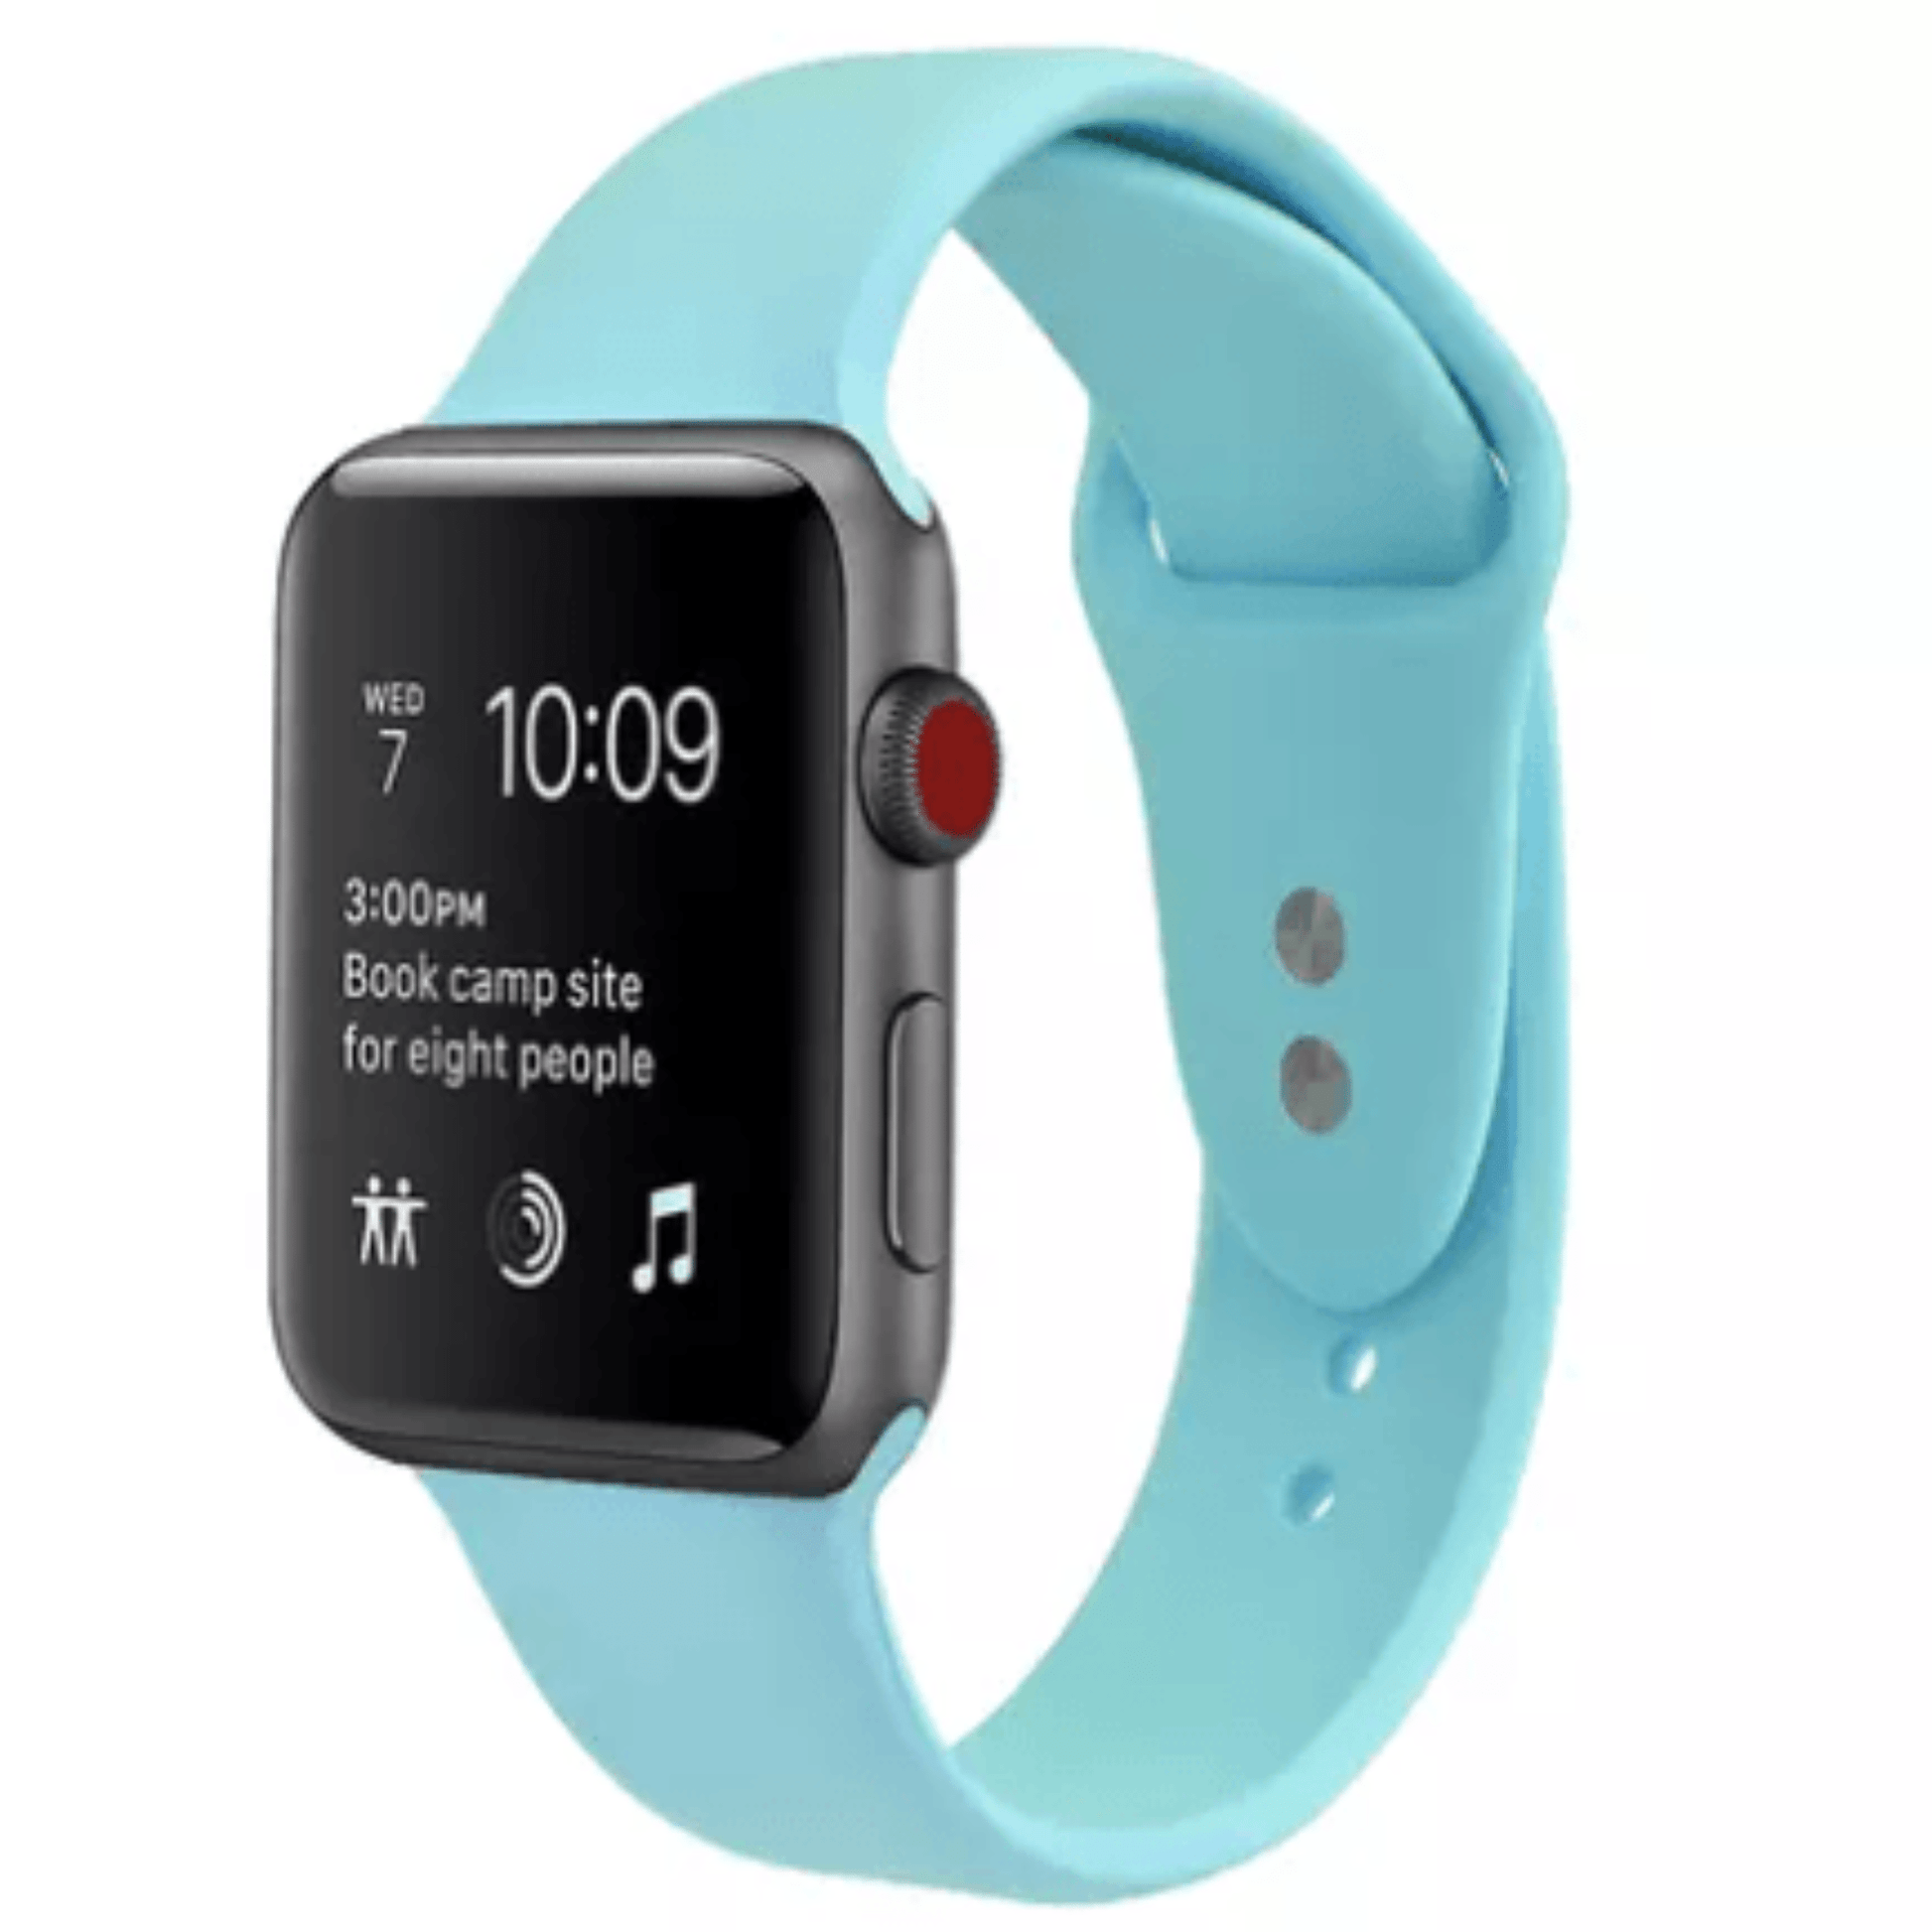 Silicone Sport Replacement Band for Apple Watch Turquoise Apple Watch Band Elements Watches